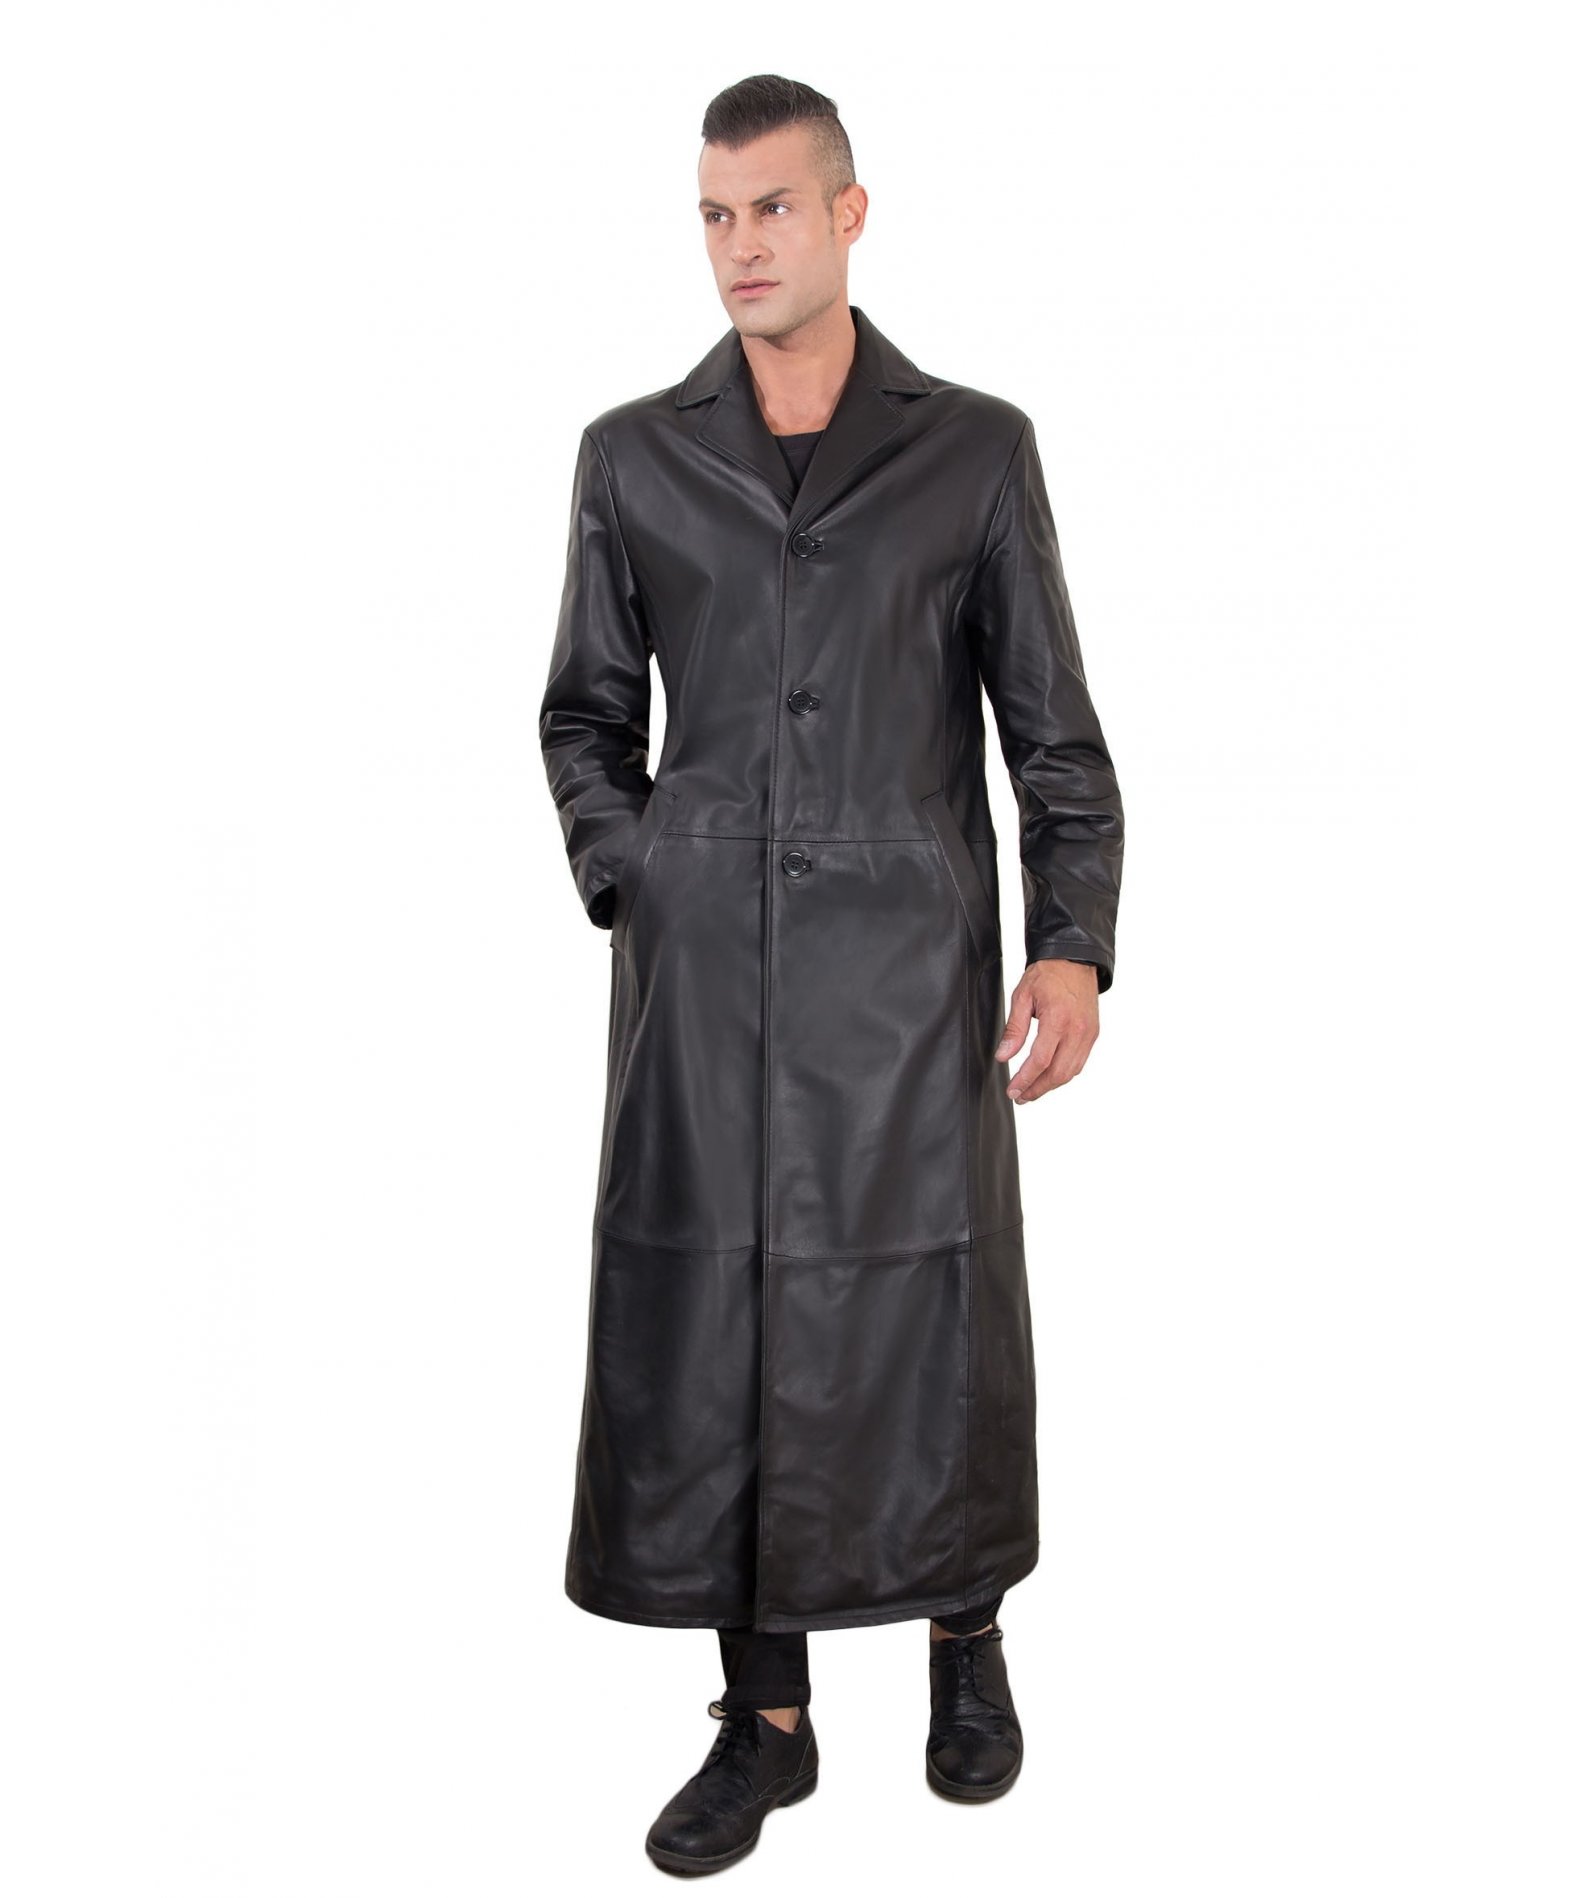 Leather Insert A-Line Glitter Coat - Men - OBSOLETES DO NOT TOUCH